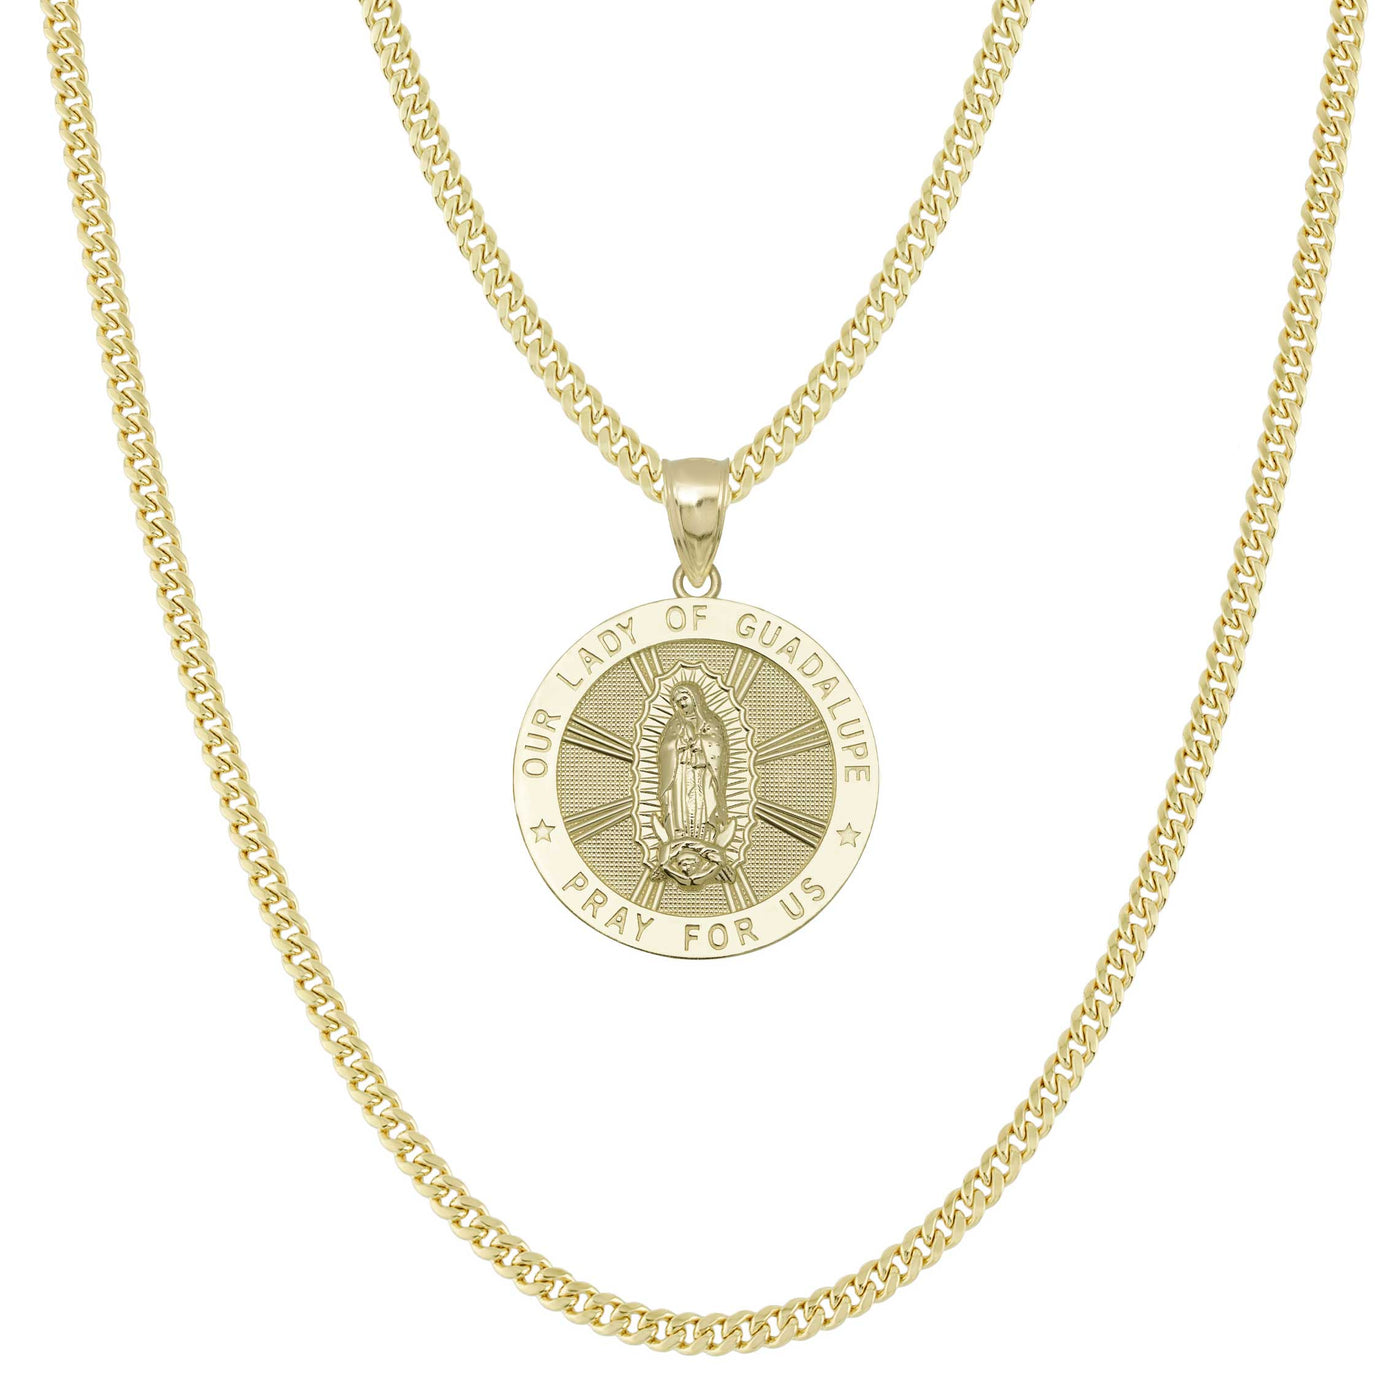 Lady Guadalupe Virgin Mary Medallion Pendant & Chain Necklace Set 10K Yellow Gold